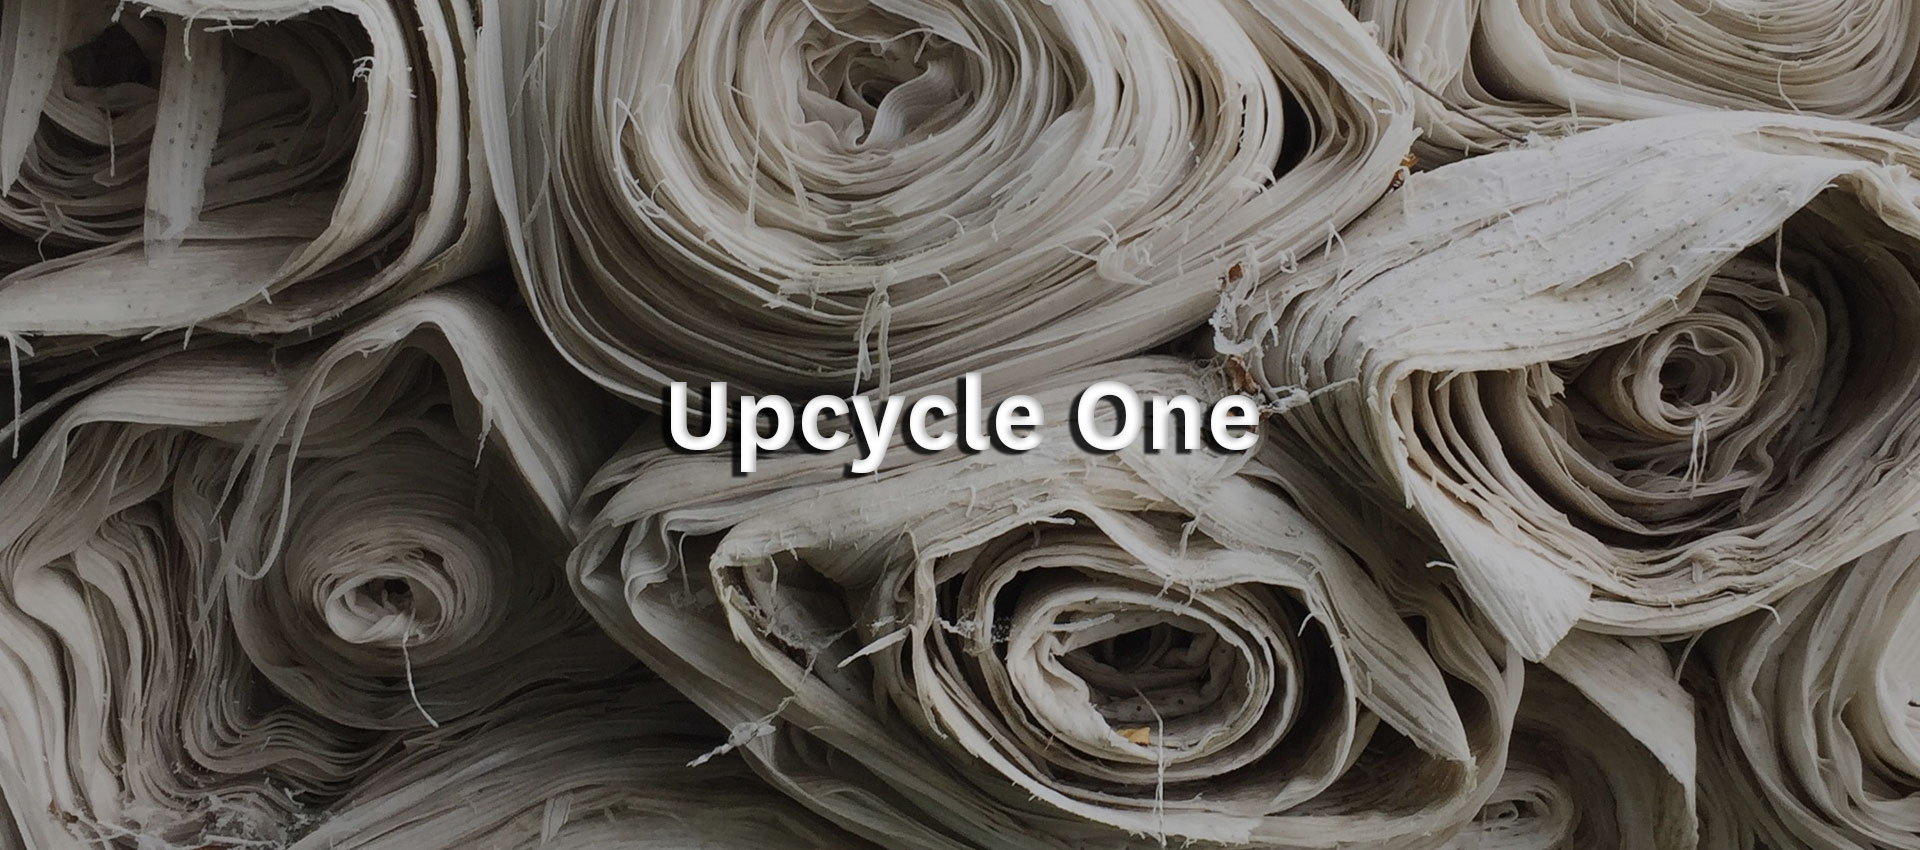 Event title: Upcycle One with piles of old fabric